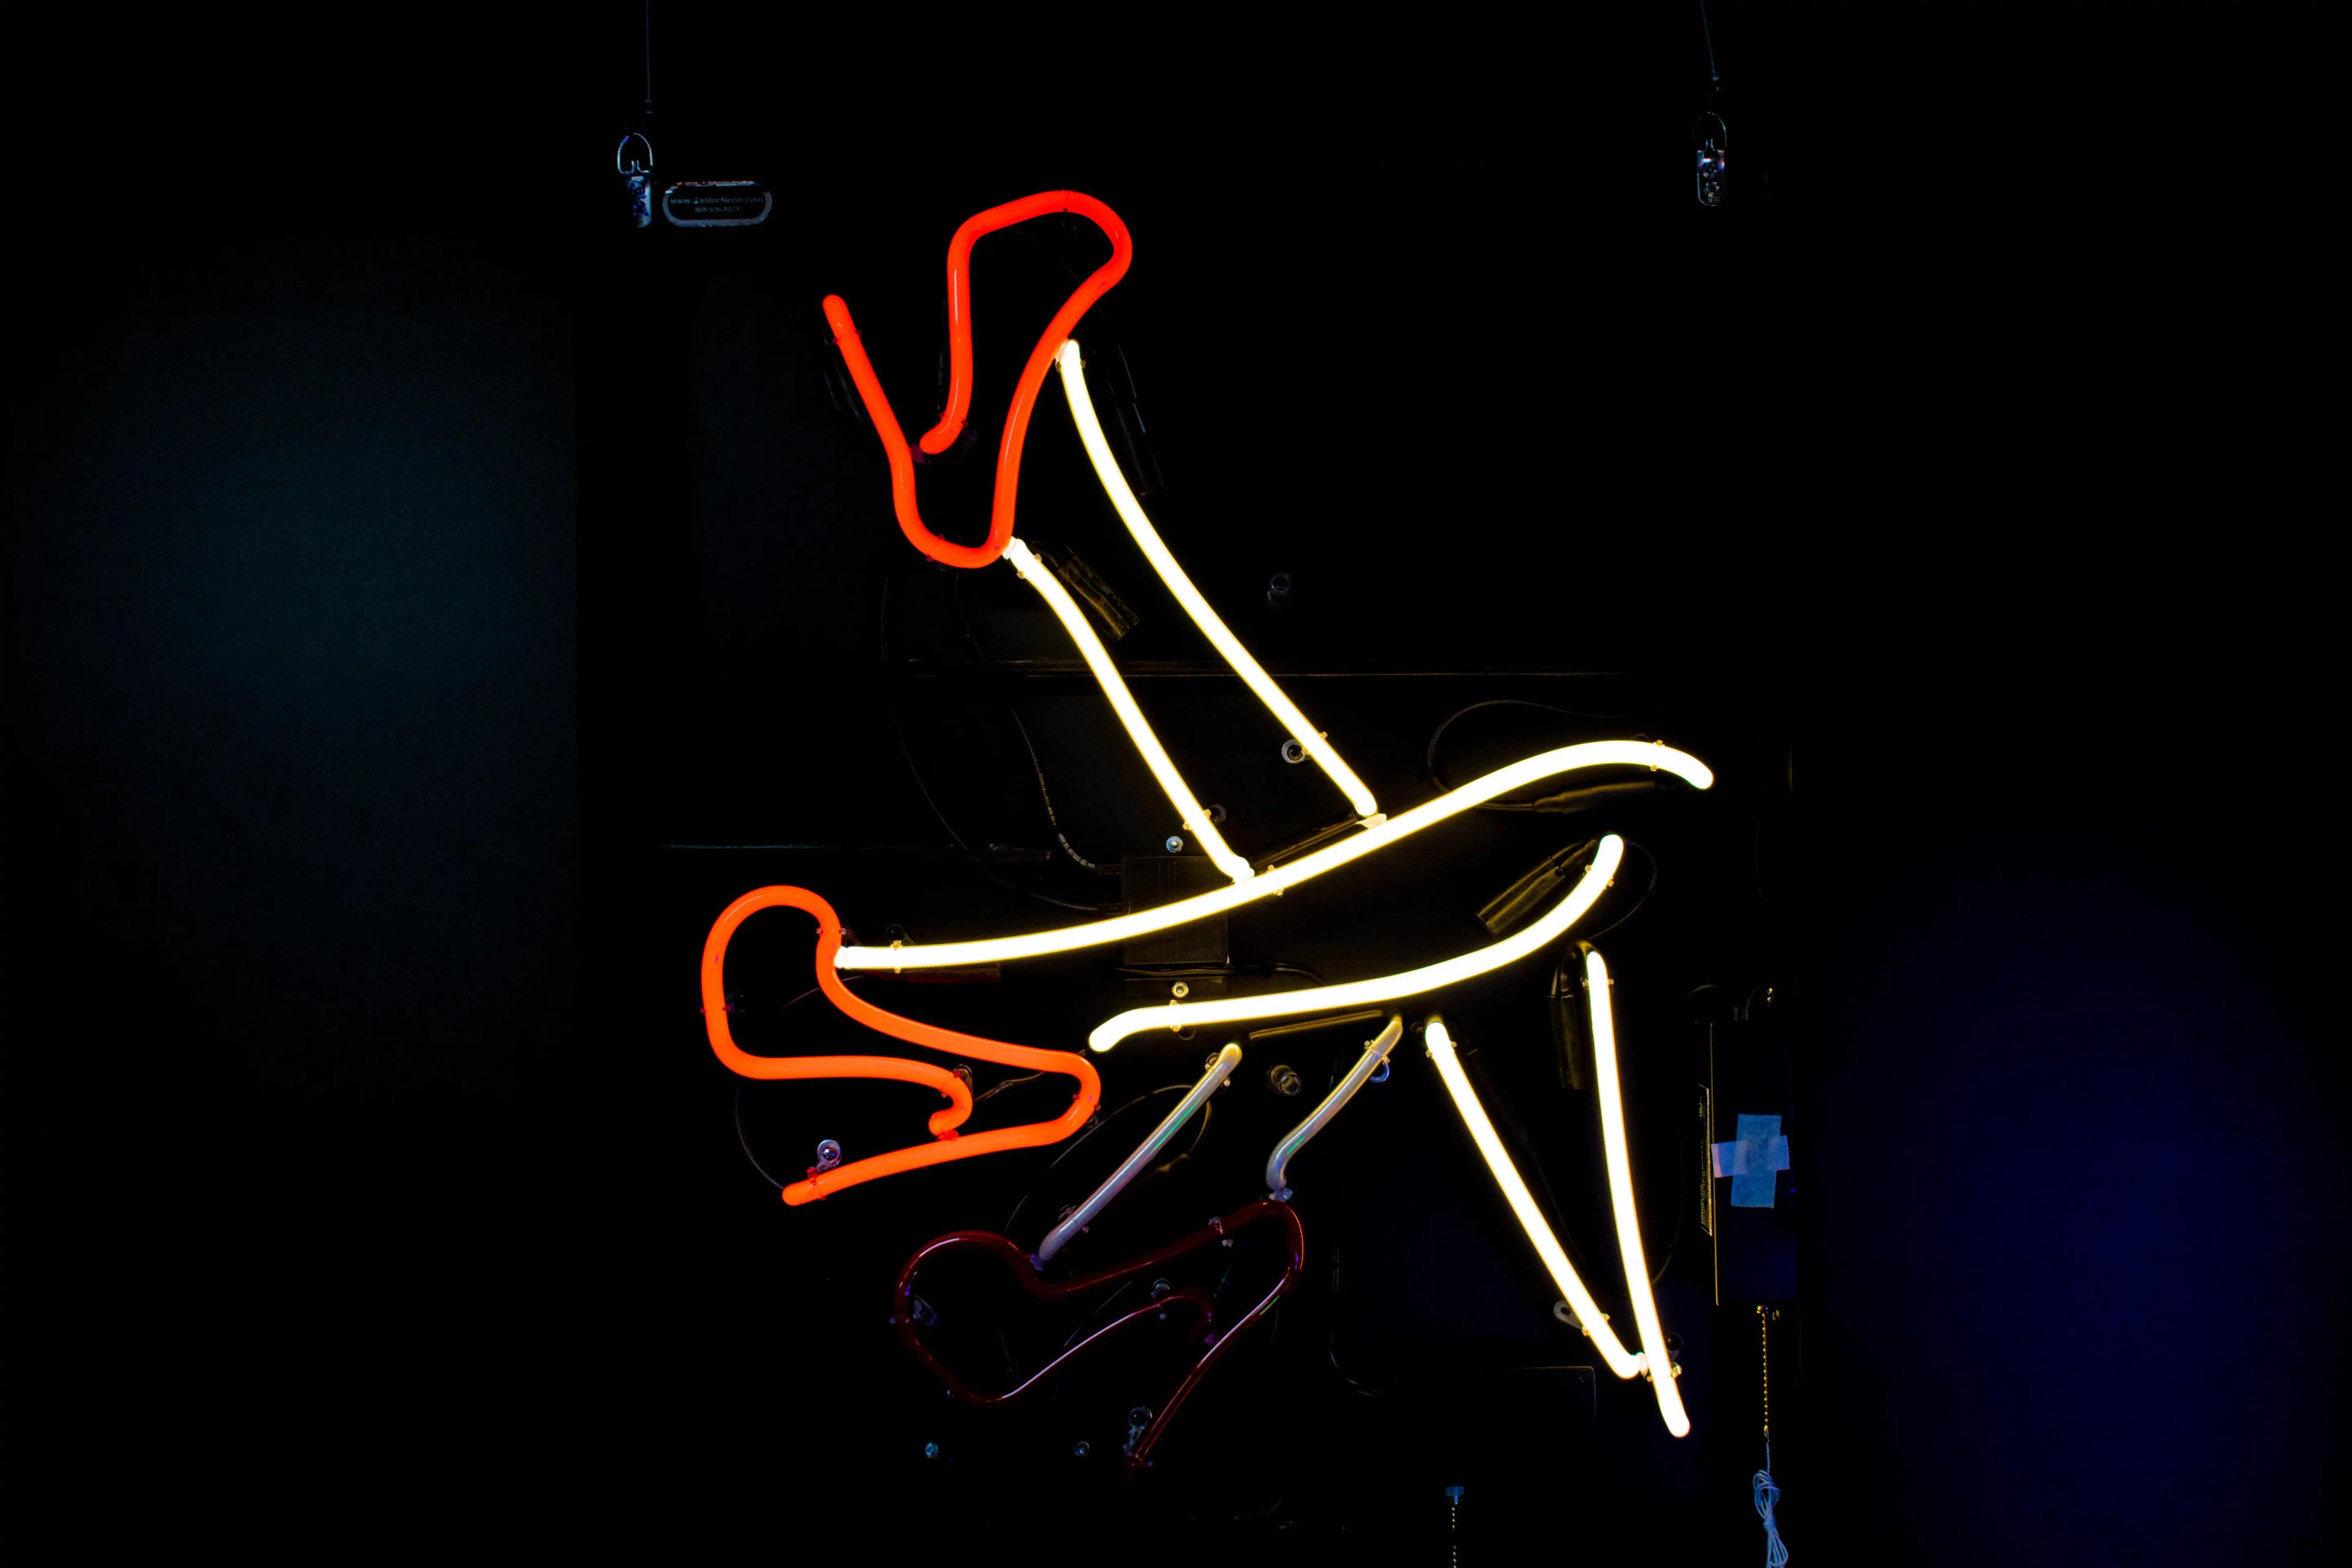 The first of three images showing a neon sign of legs kicking. 